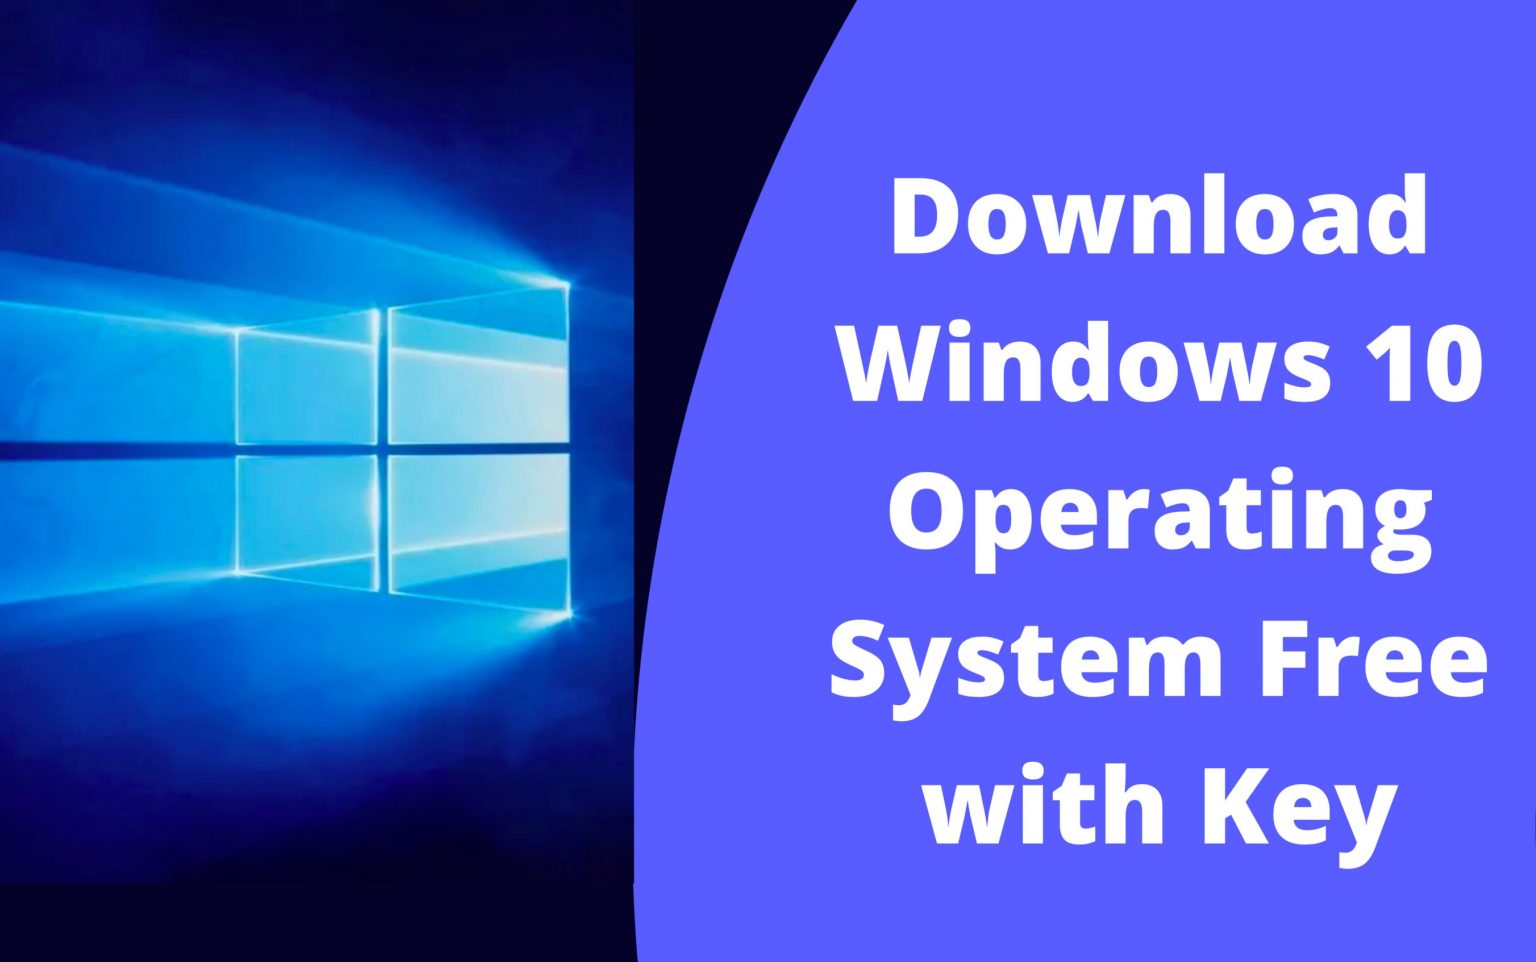 windows 10 download operating system